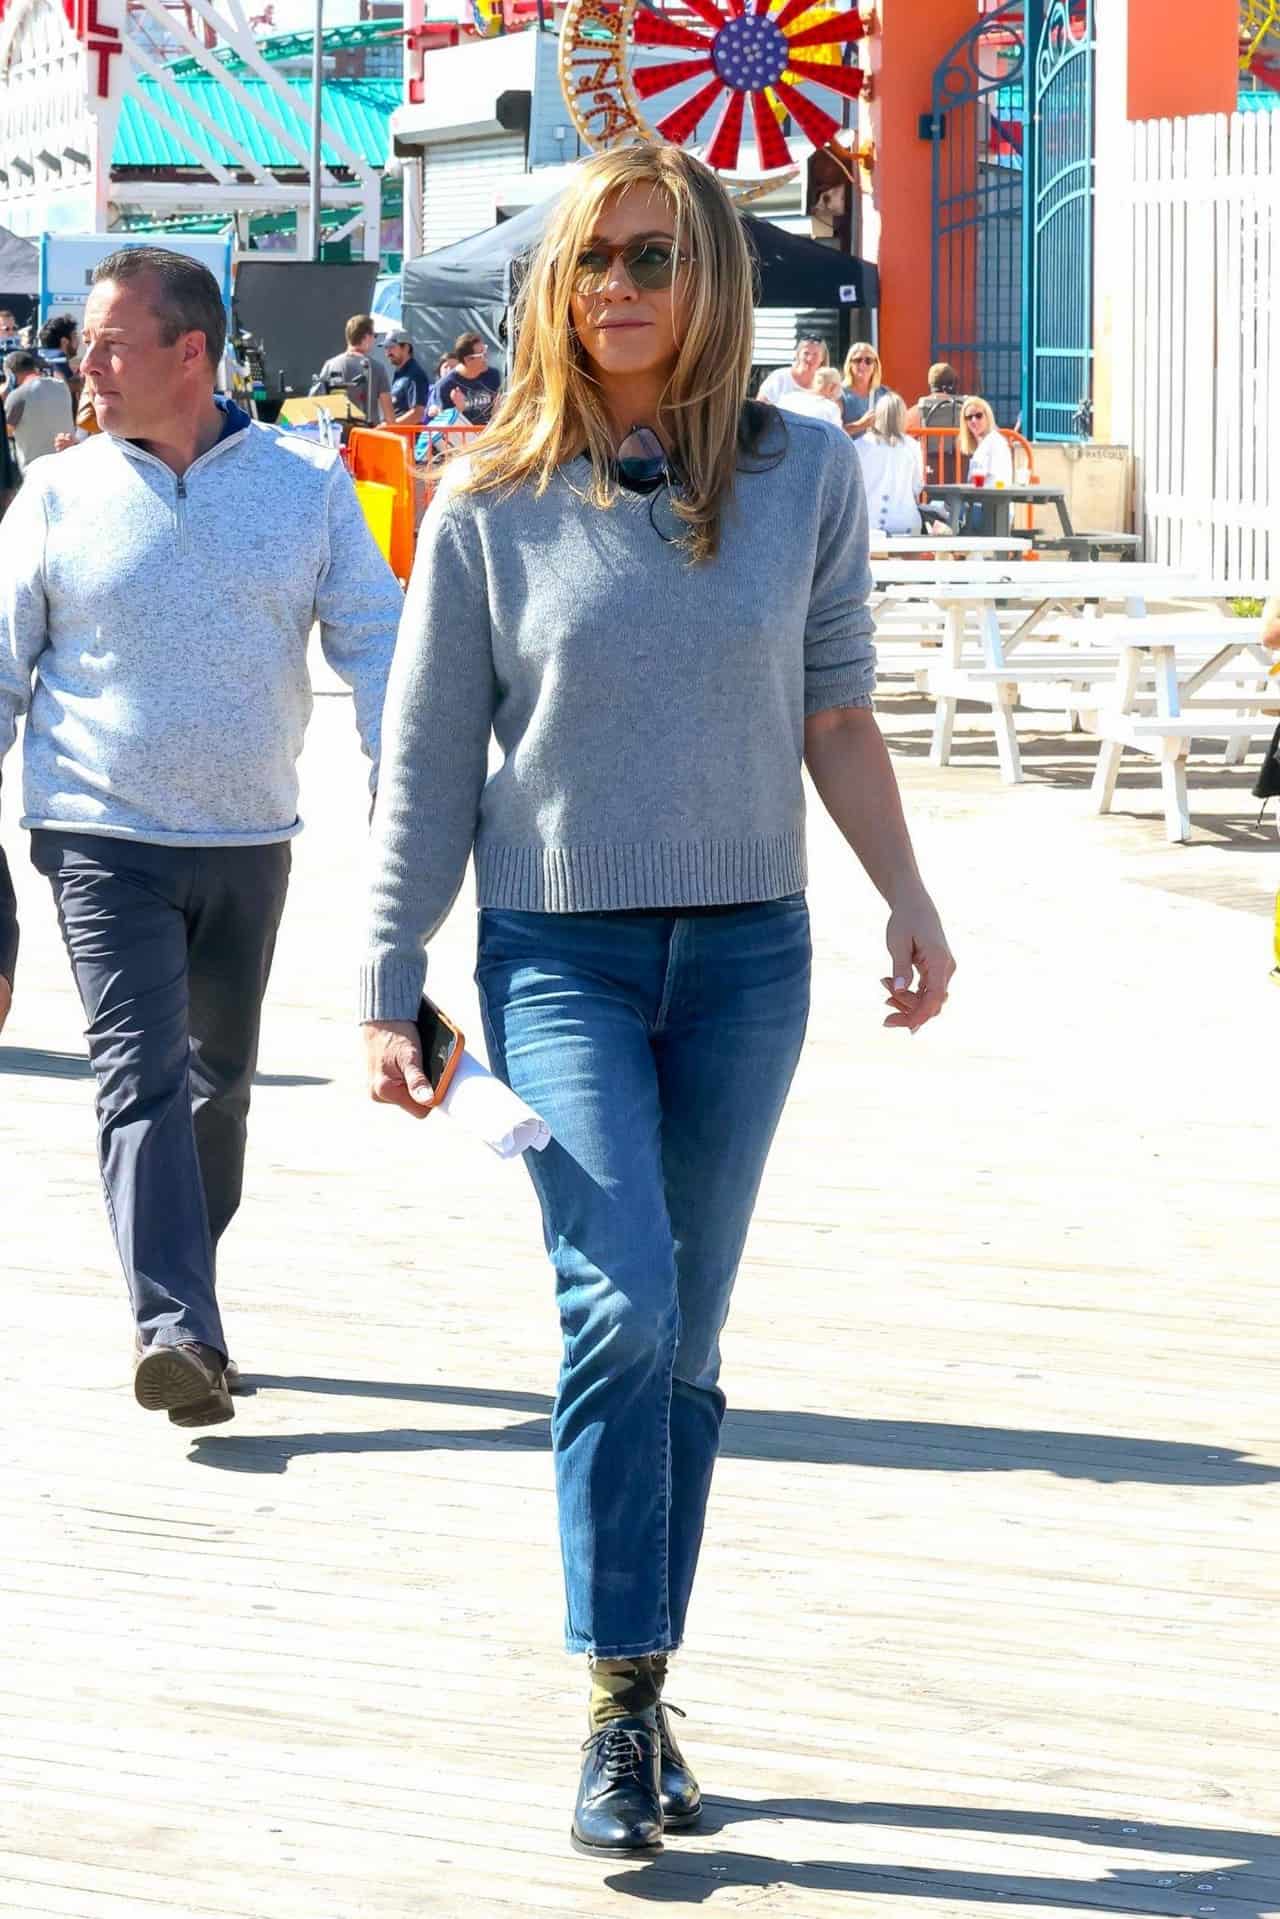 Jennifer Aniston Nails Chic Casual Style on Set of "The Morning Show"